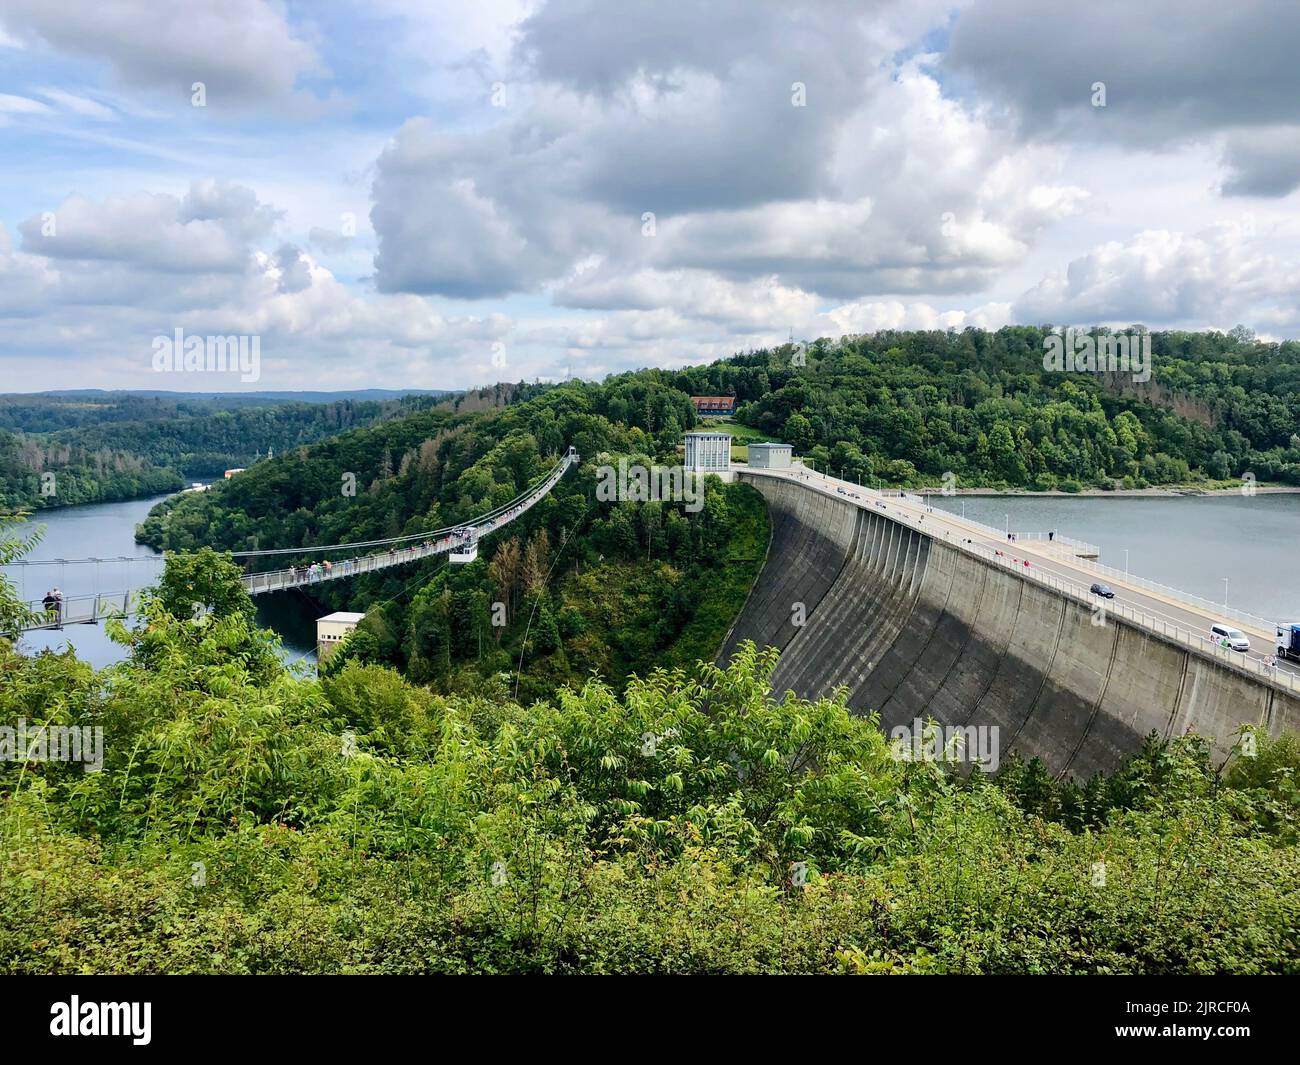 A beautiful view of the highest dam in Germany Rappbode Dam with a bridge and river down below surrounded by greenery Stock Photo